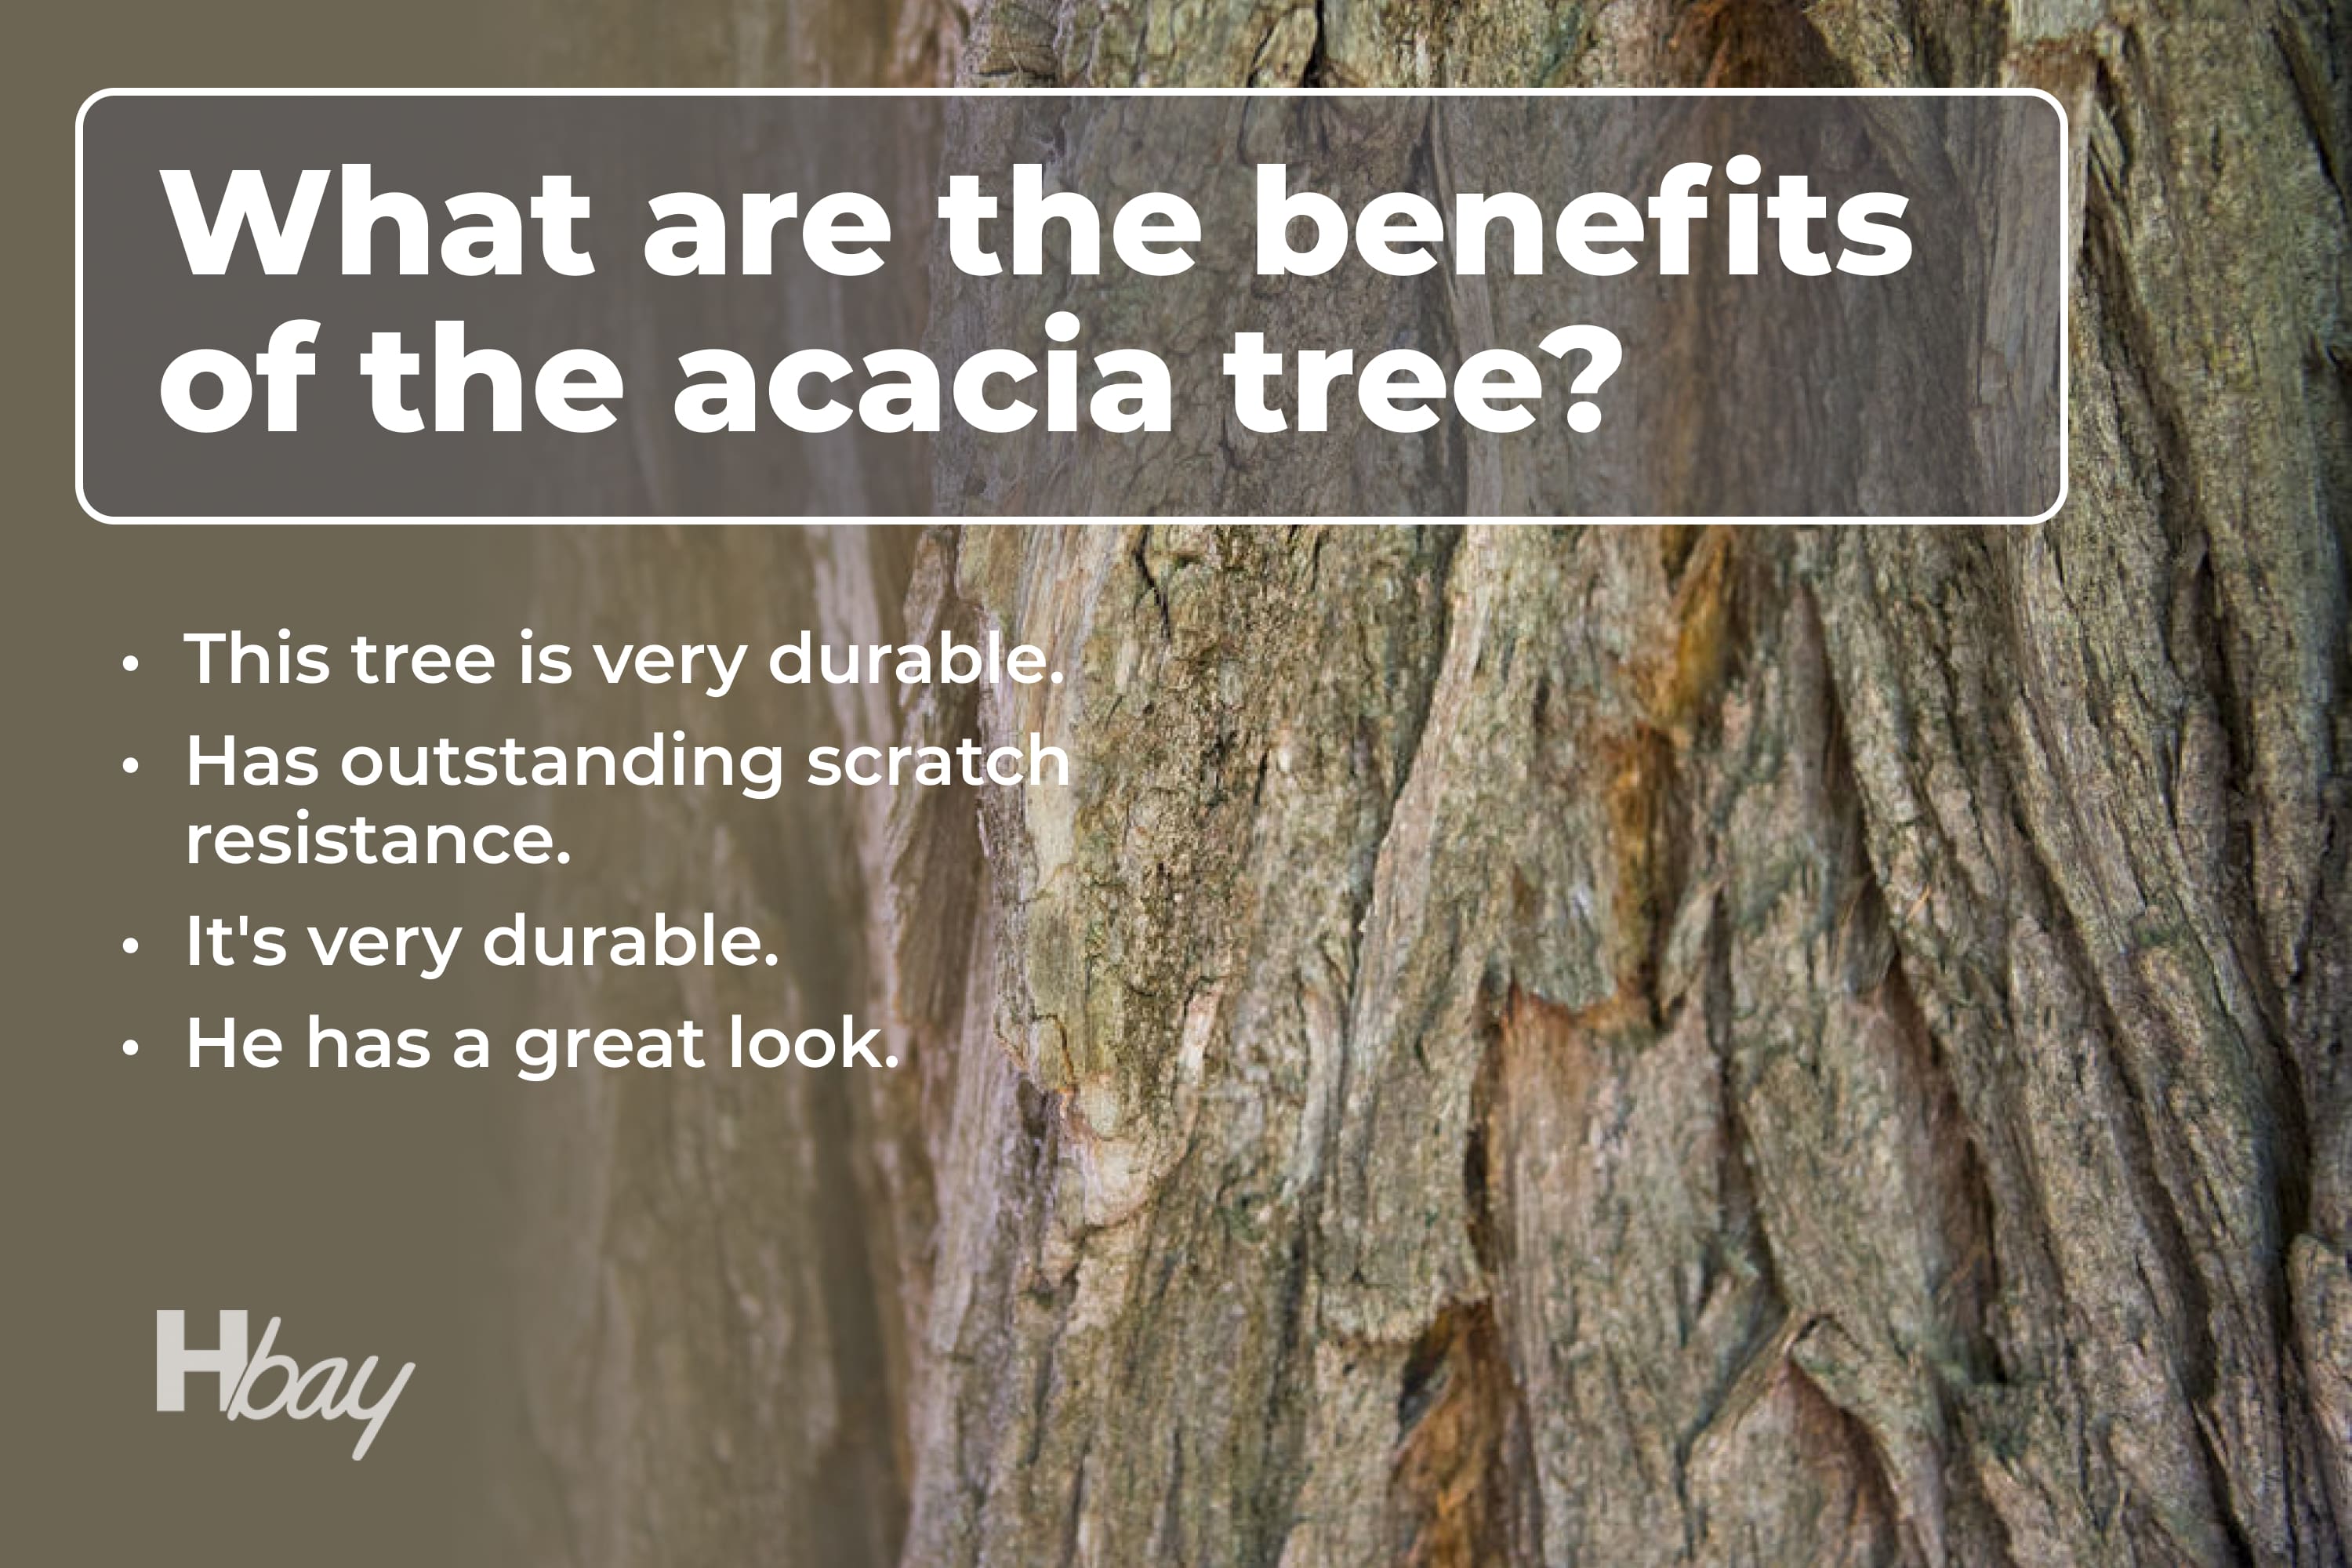 What are the benefits of the acacia tree